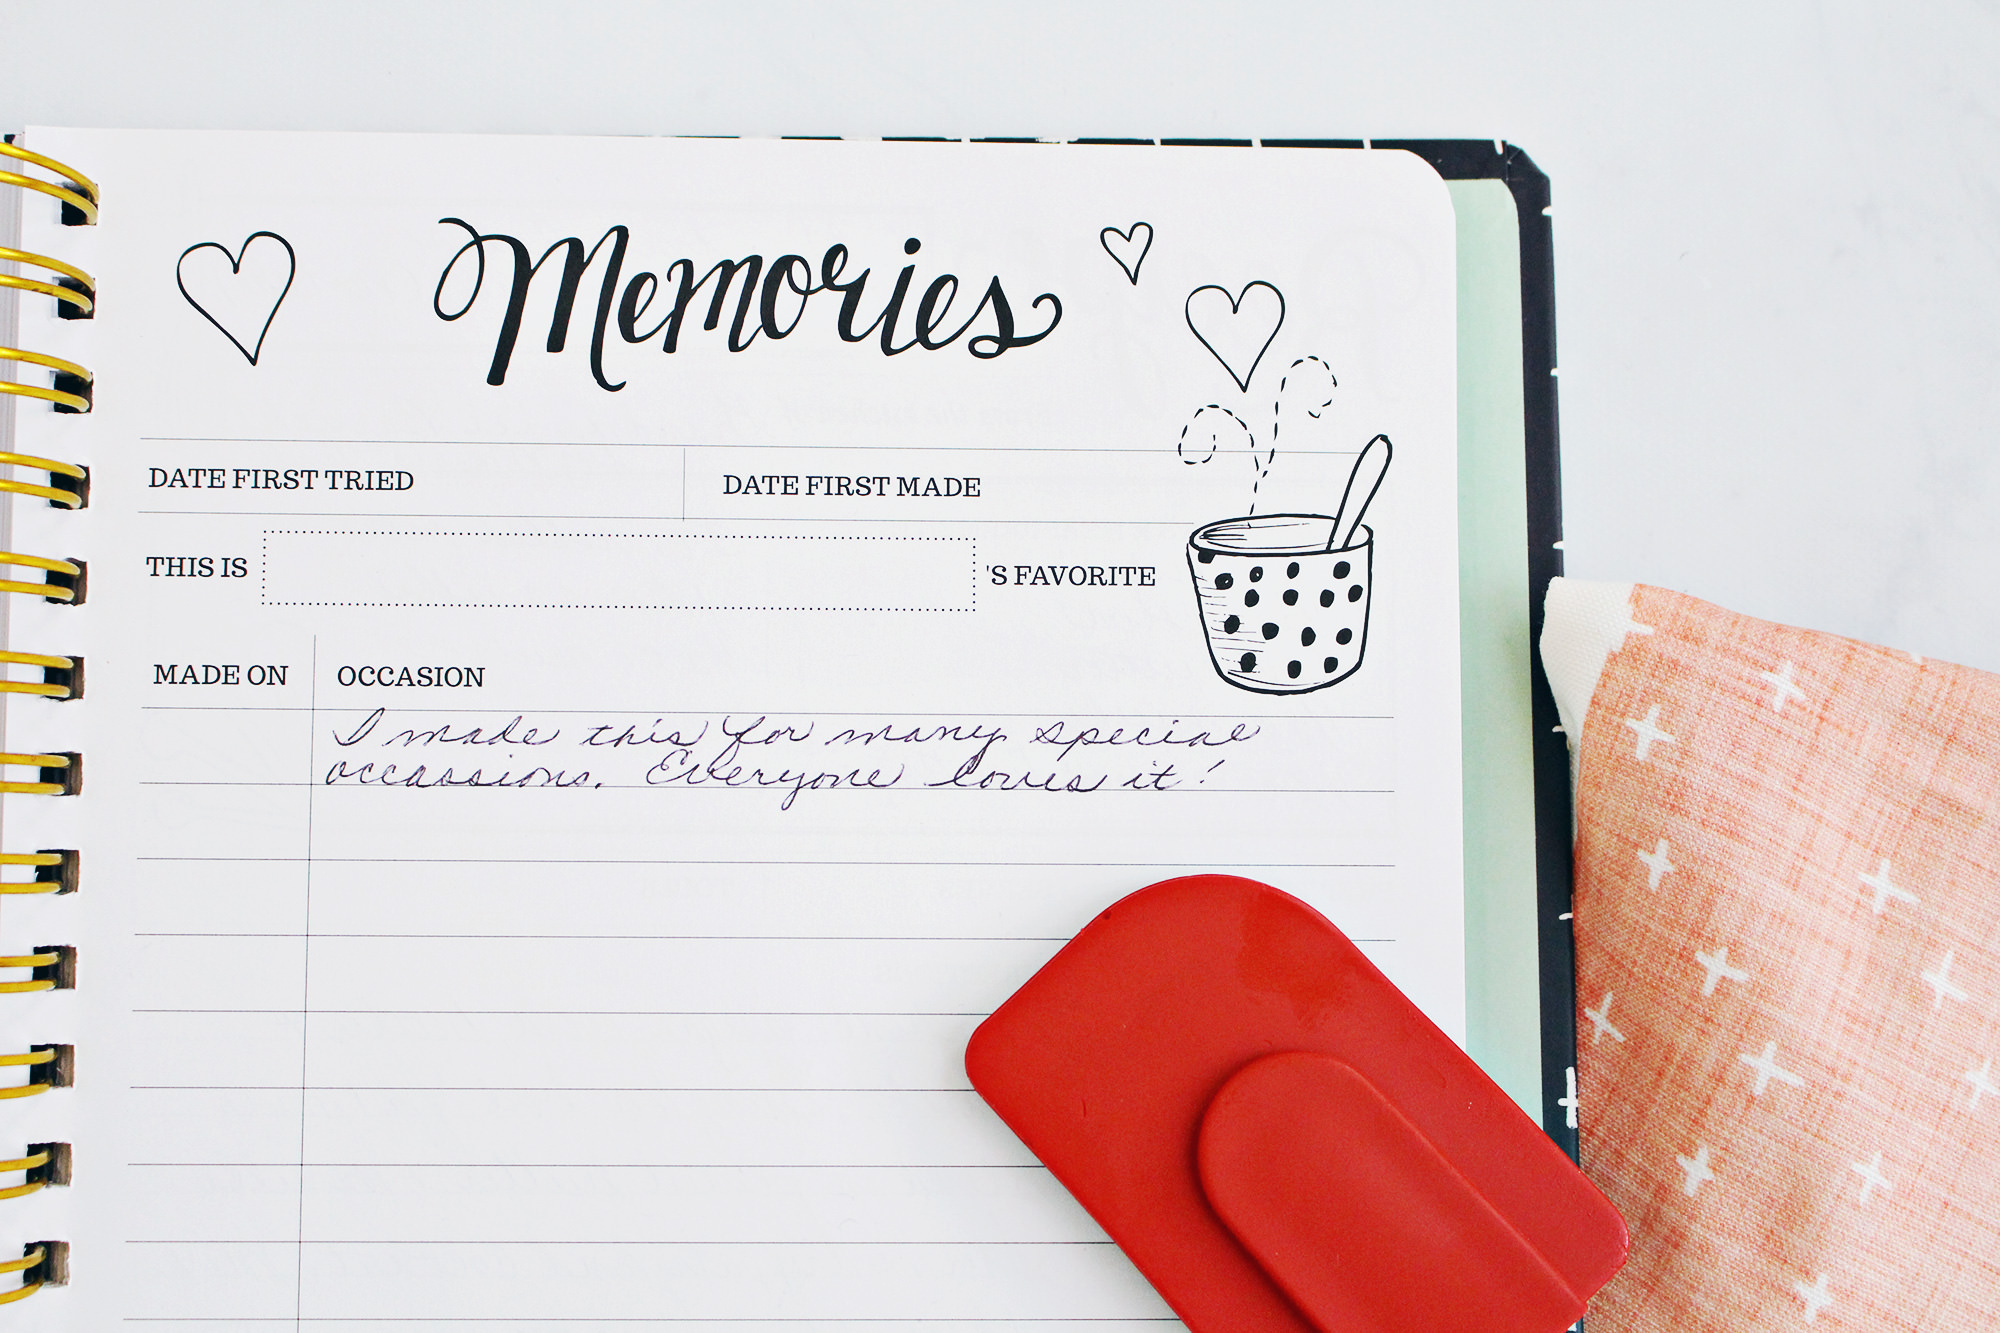 The Keepsake Kitchen Diary includes a journaling "Memories" page on each spread for filling in special dates and occasions. This makes the book a perfect gift and family heirloom.